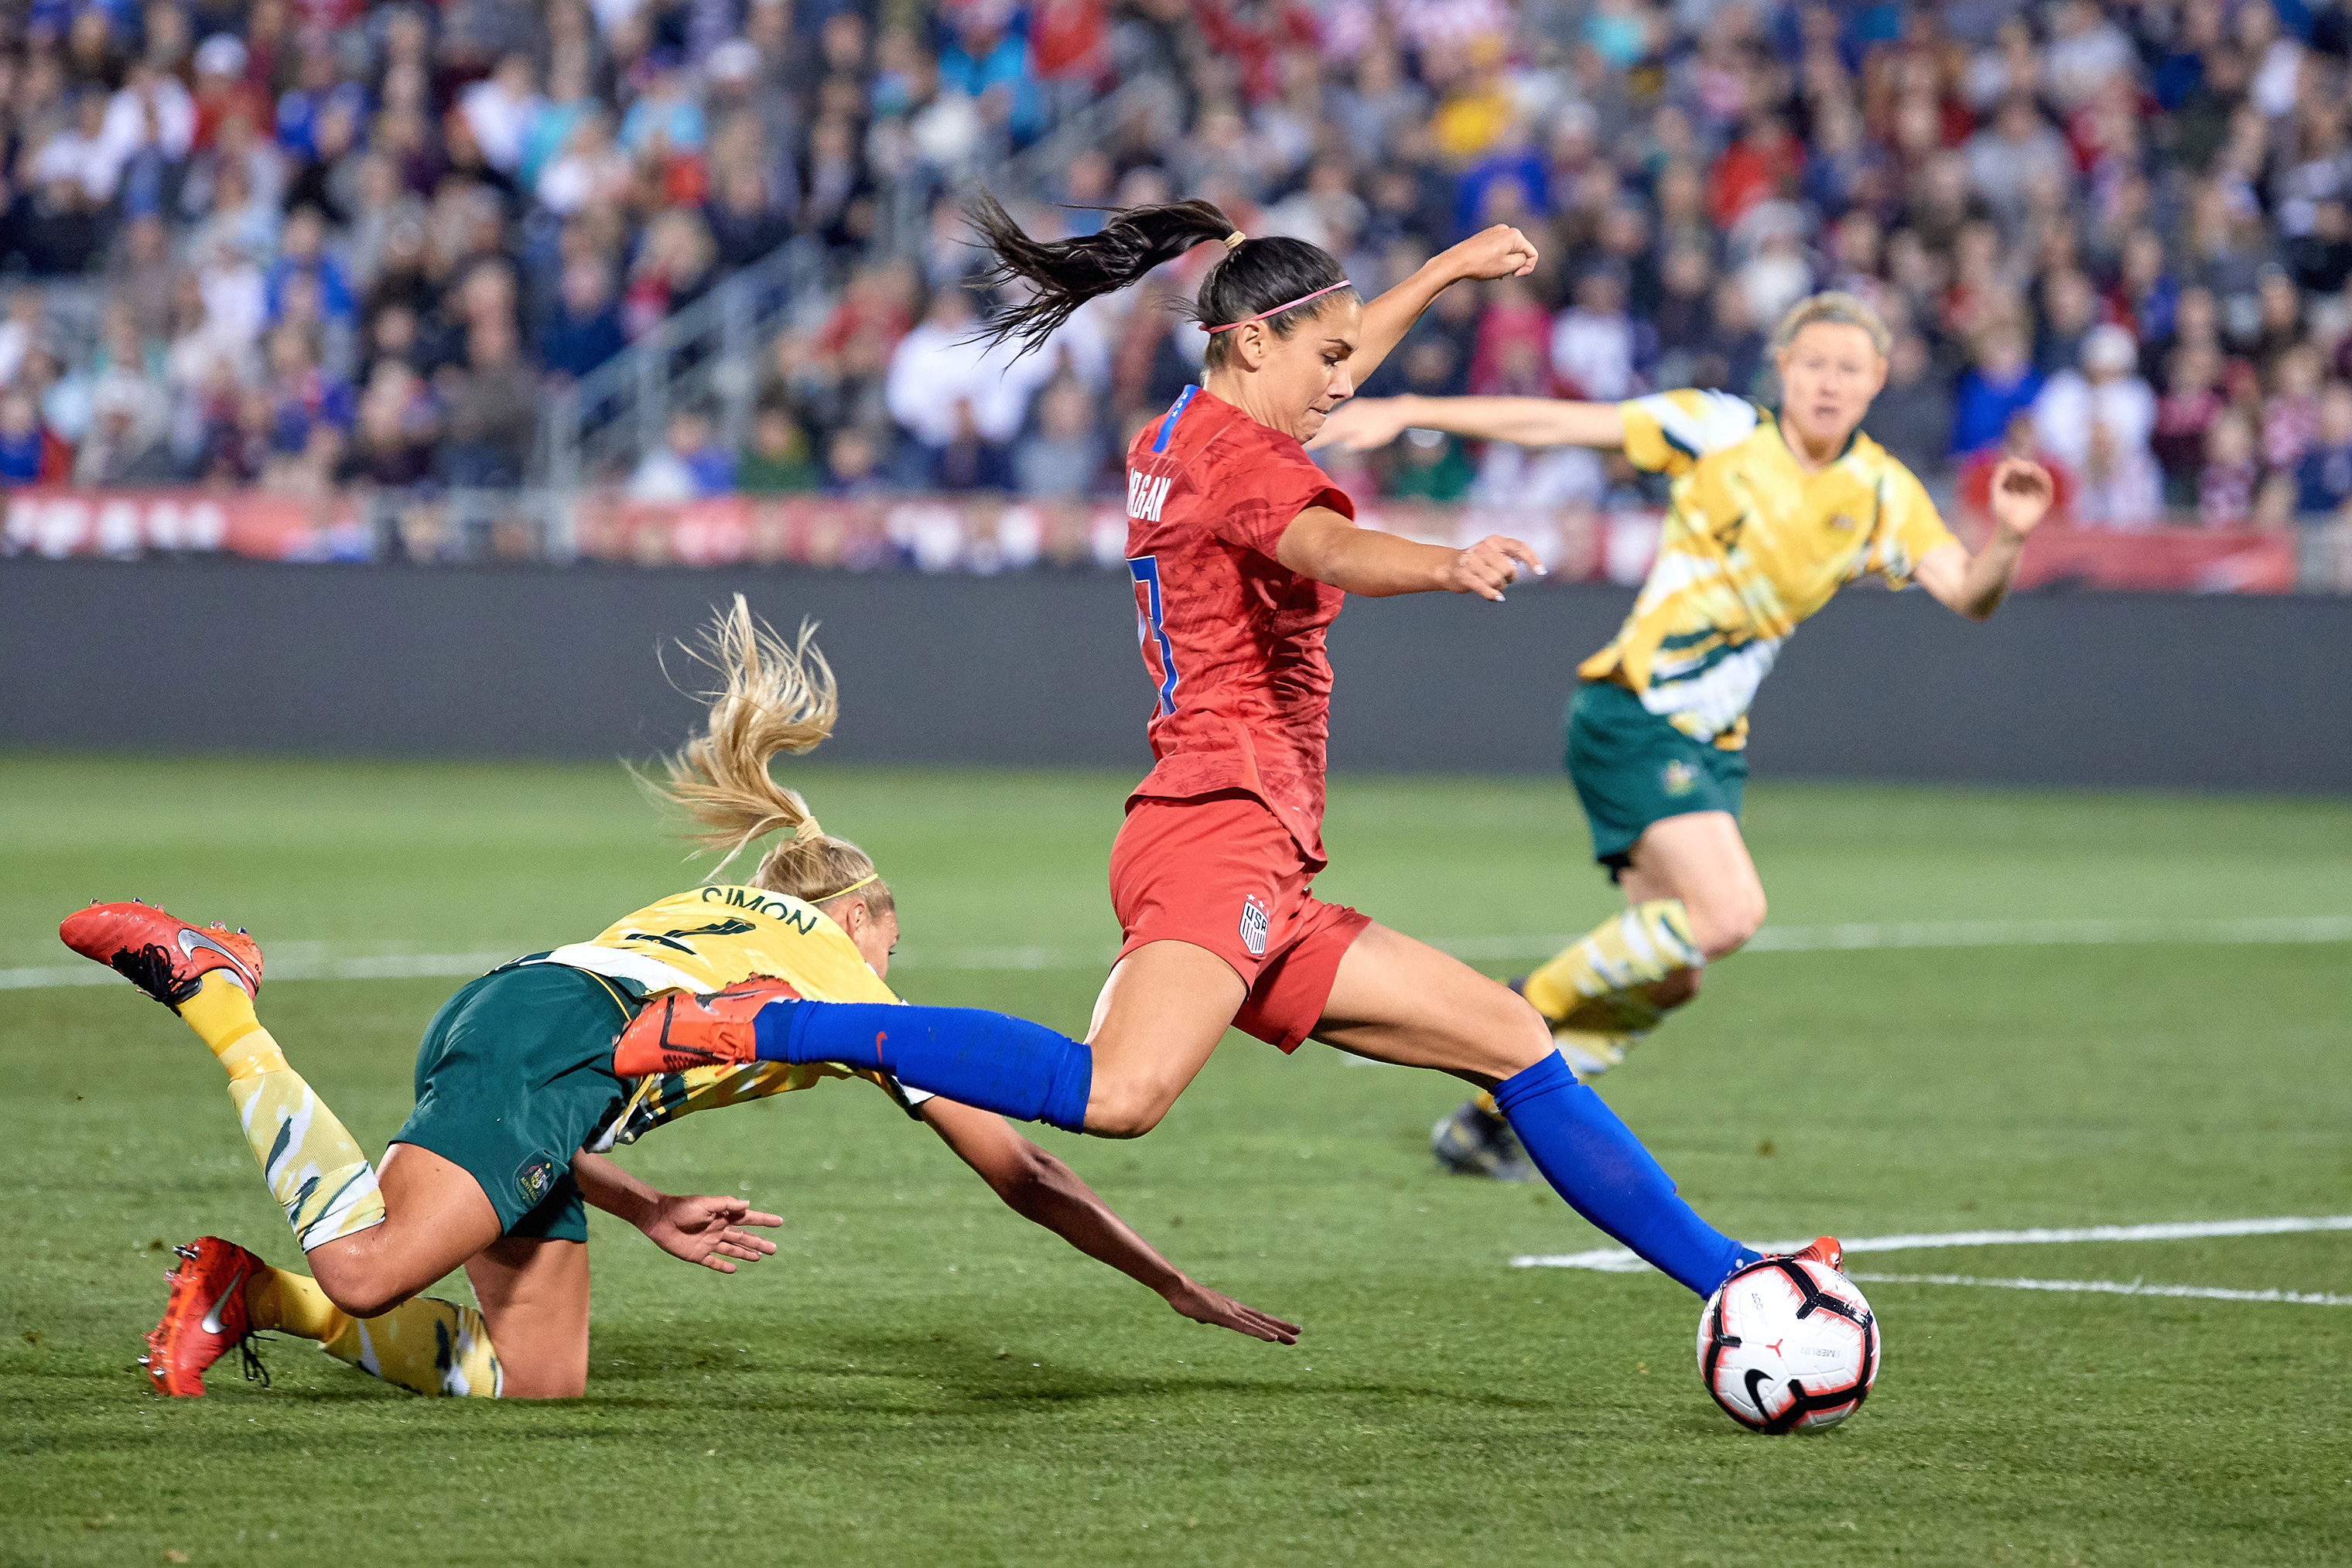 Morgan, during the game in which she scored her 100th career international goal this past April. (Getty Images)